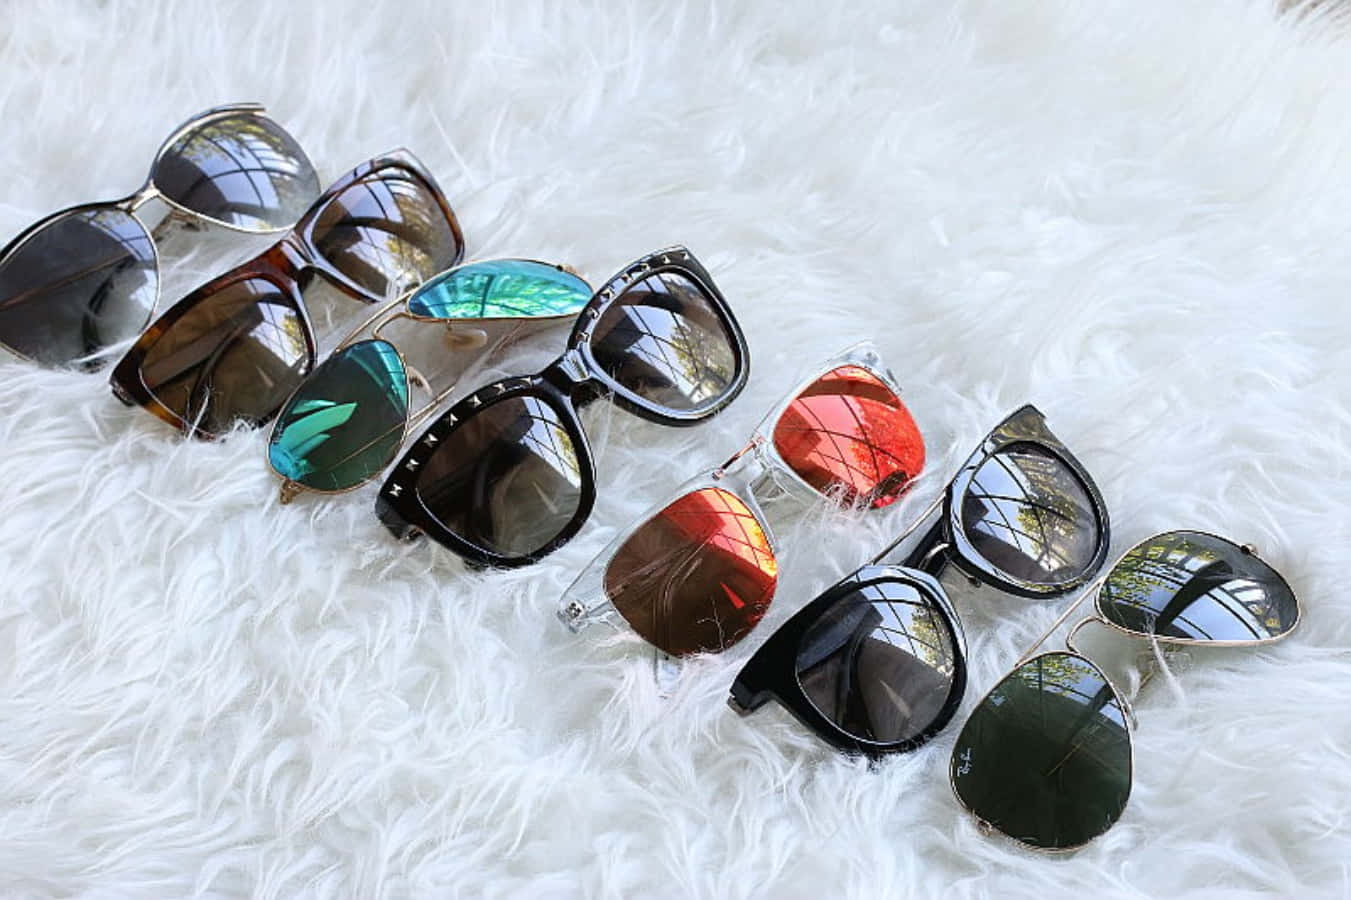 A Group Of Sunglasses Laying On A Fur Rug